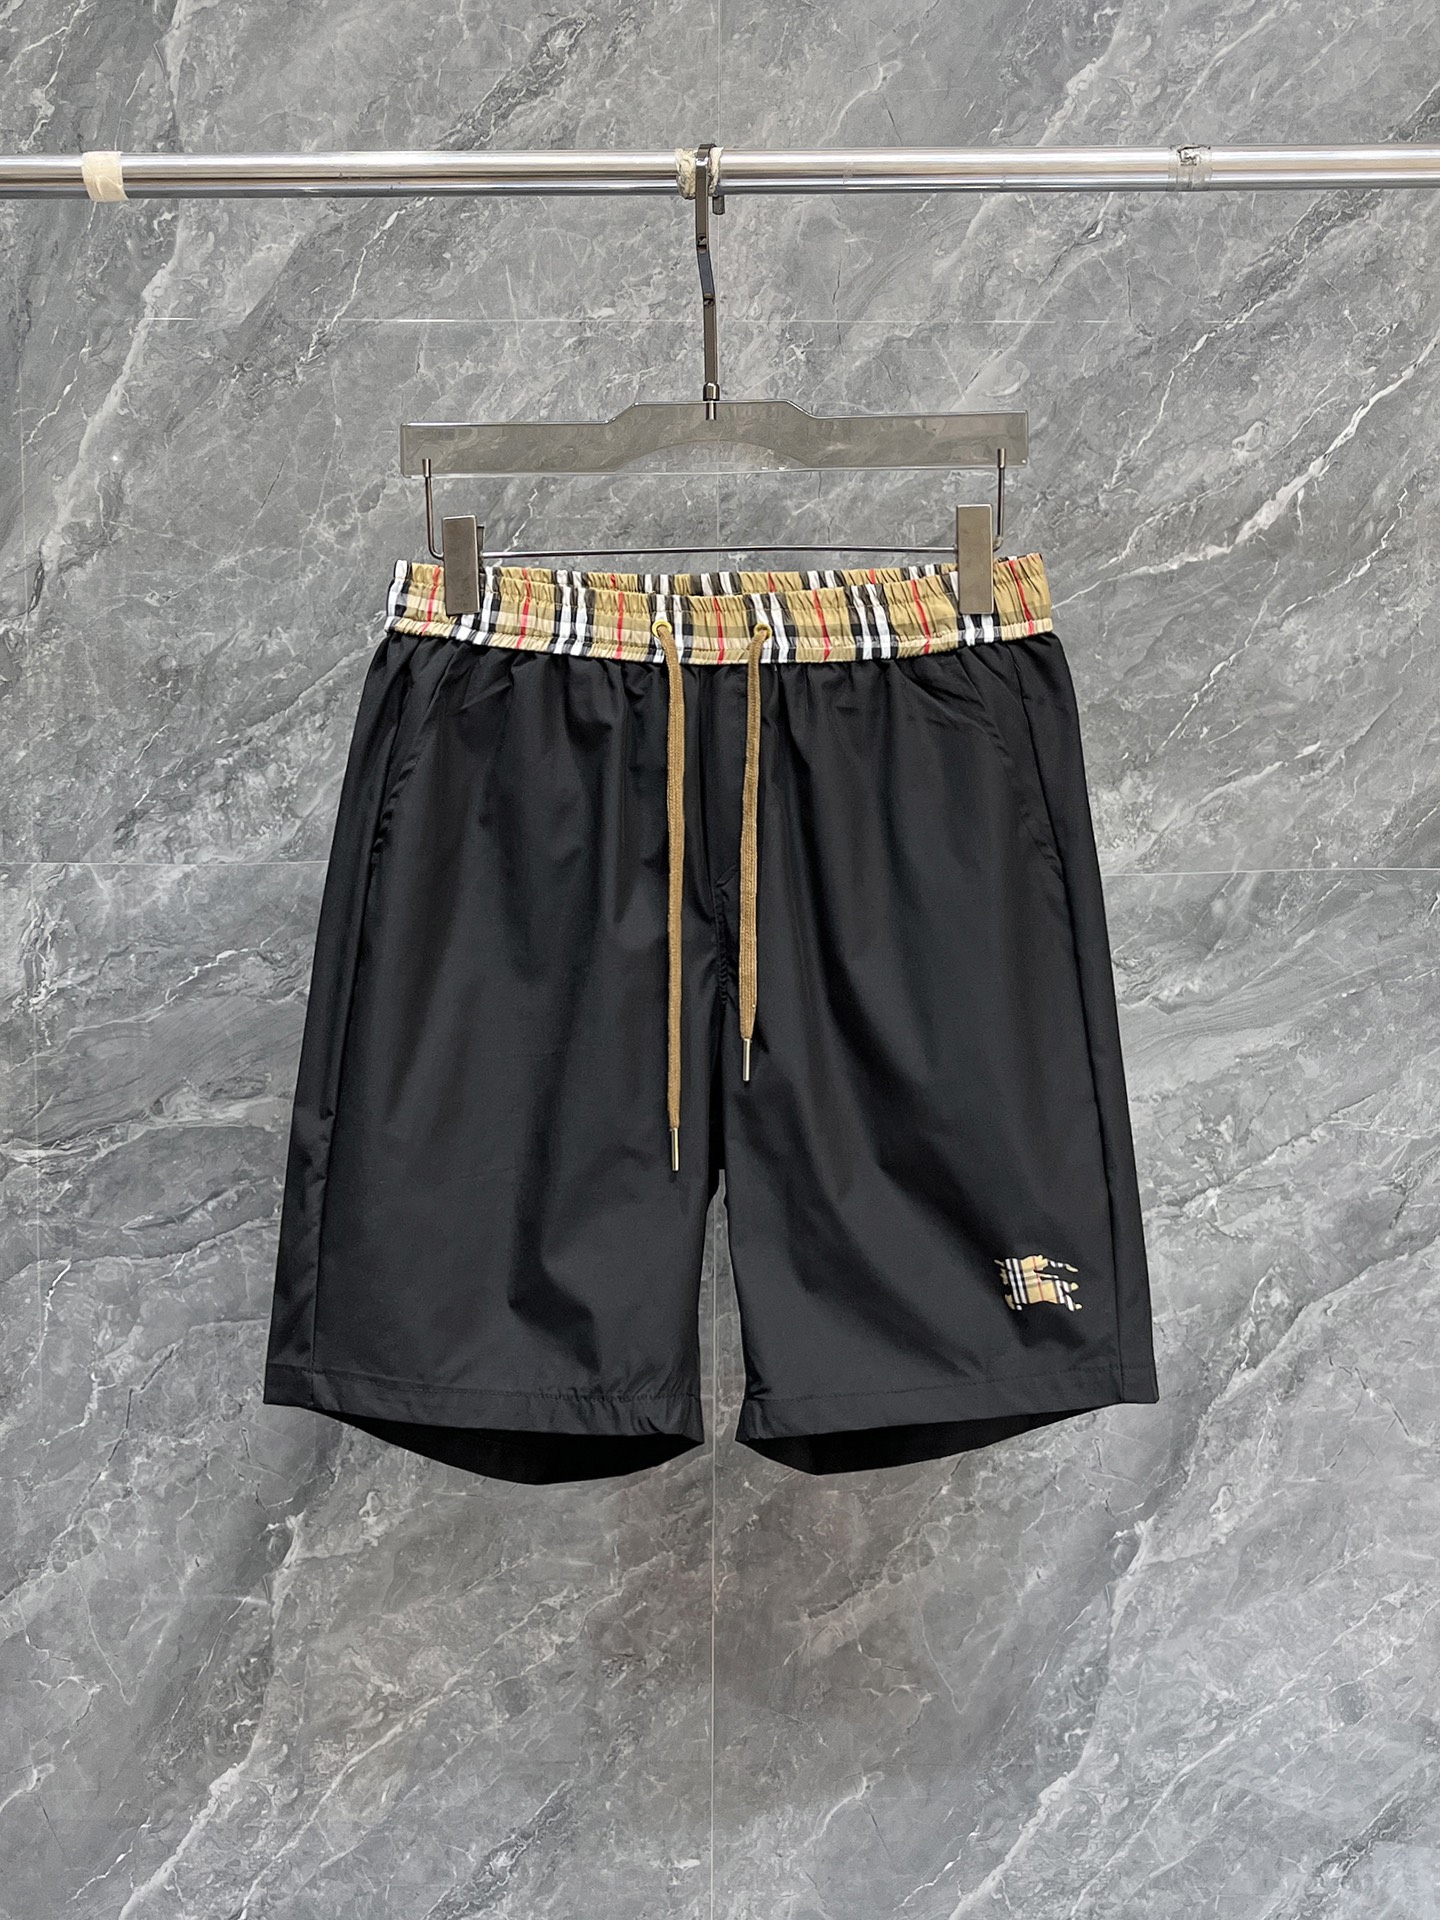 Burberry Cheap
 Clothing Shorts Cotton Summer Collection Casual